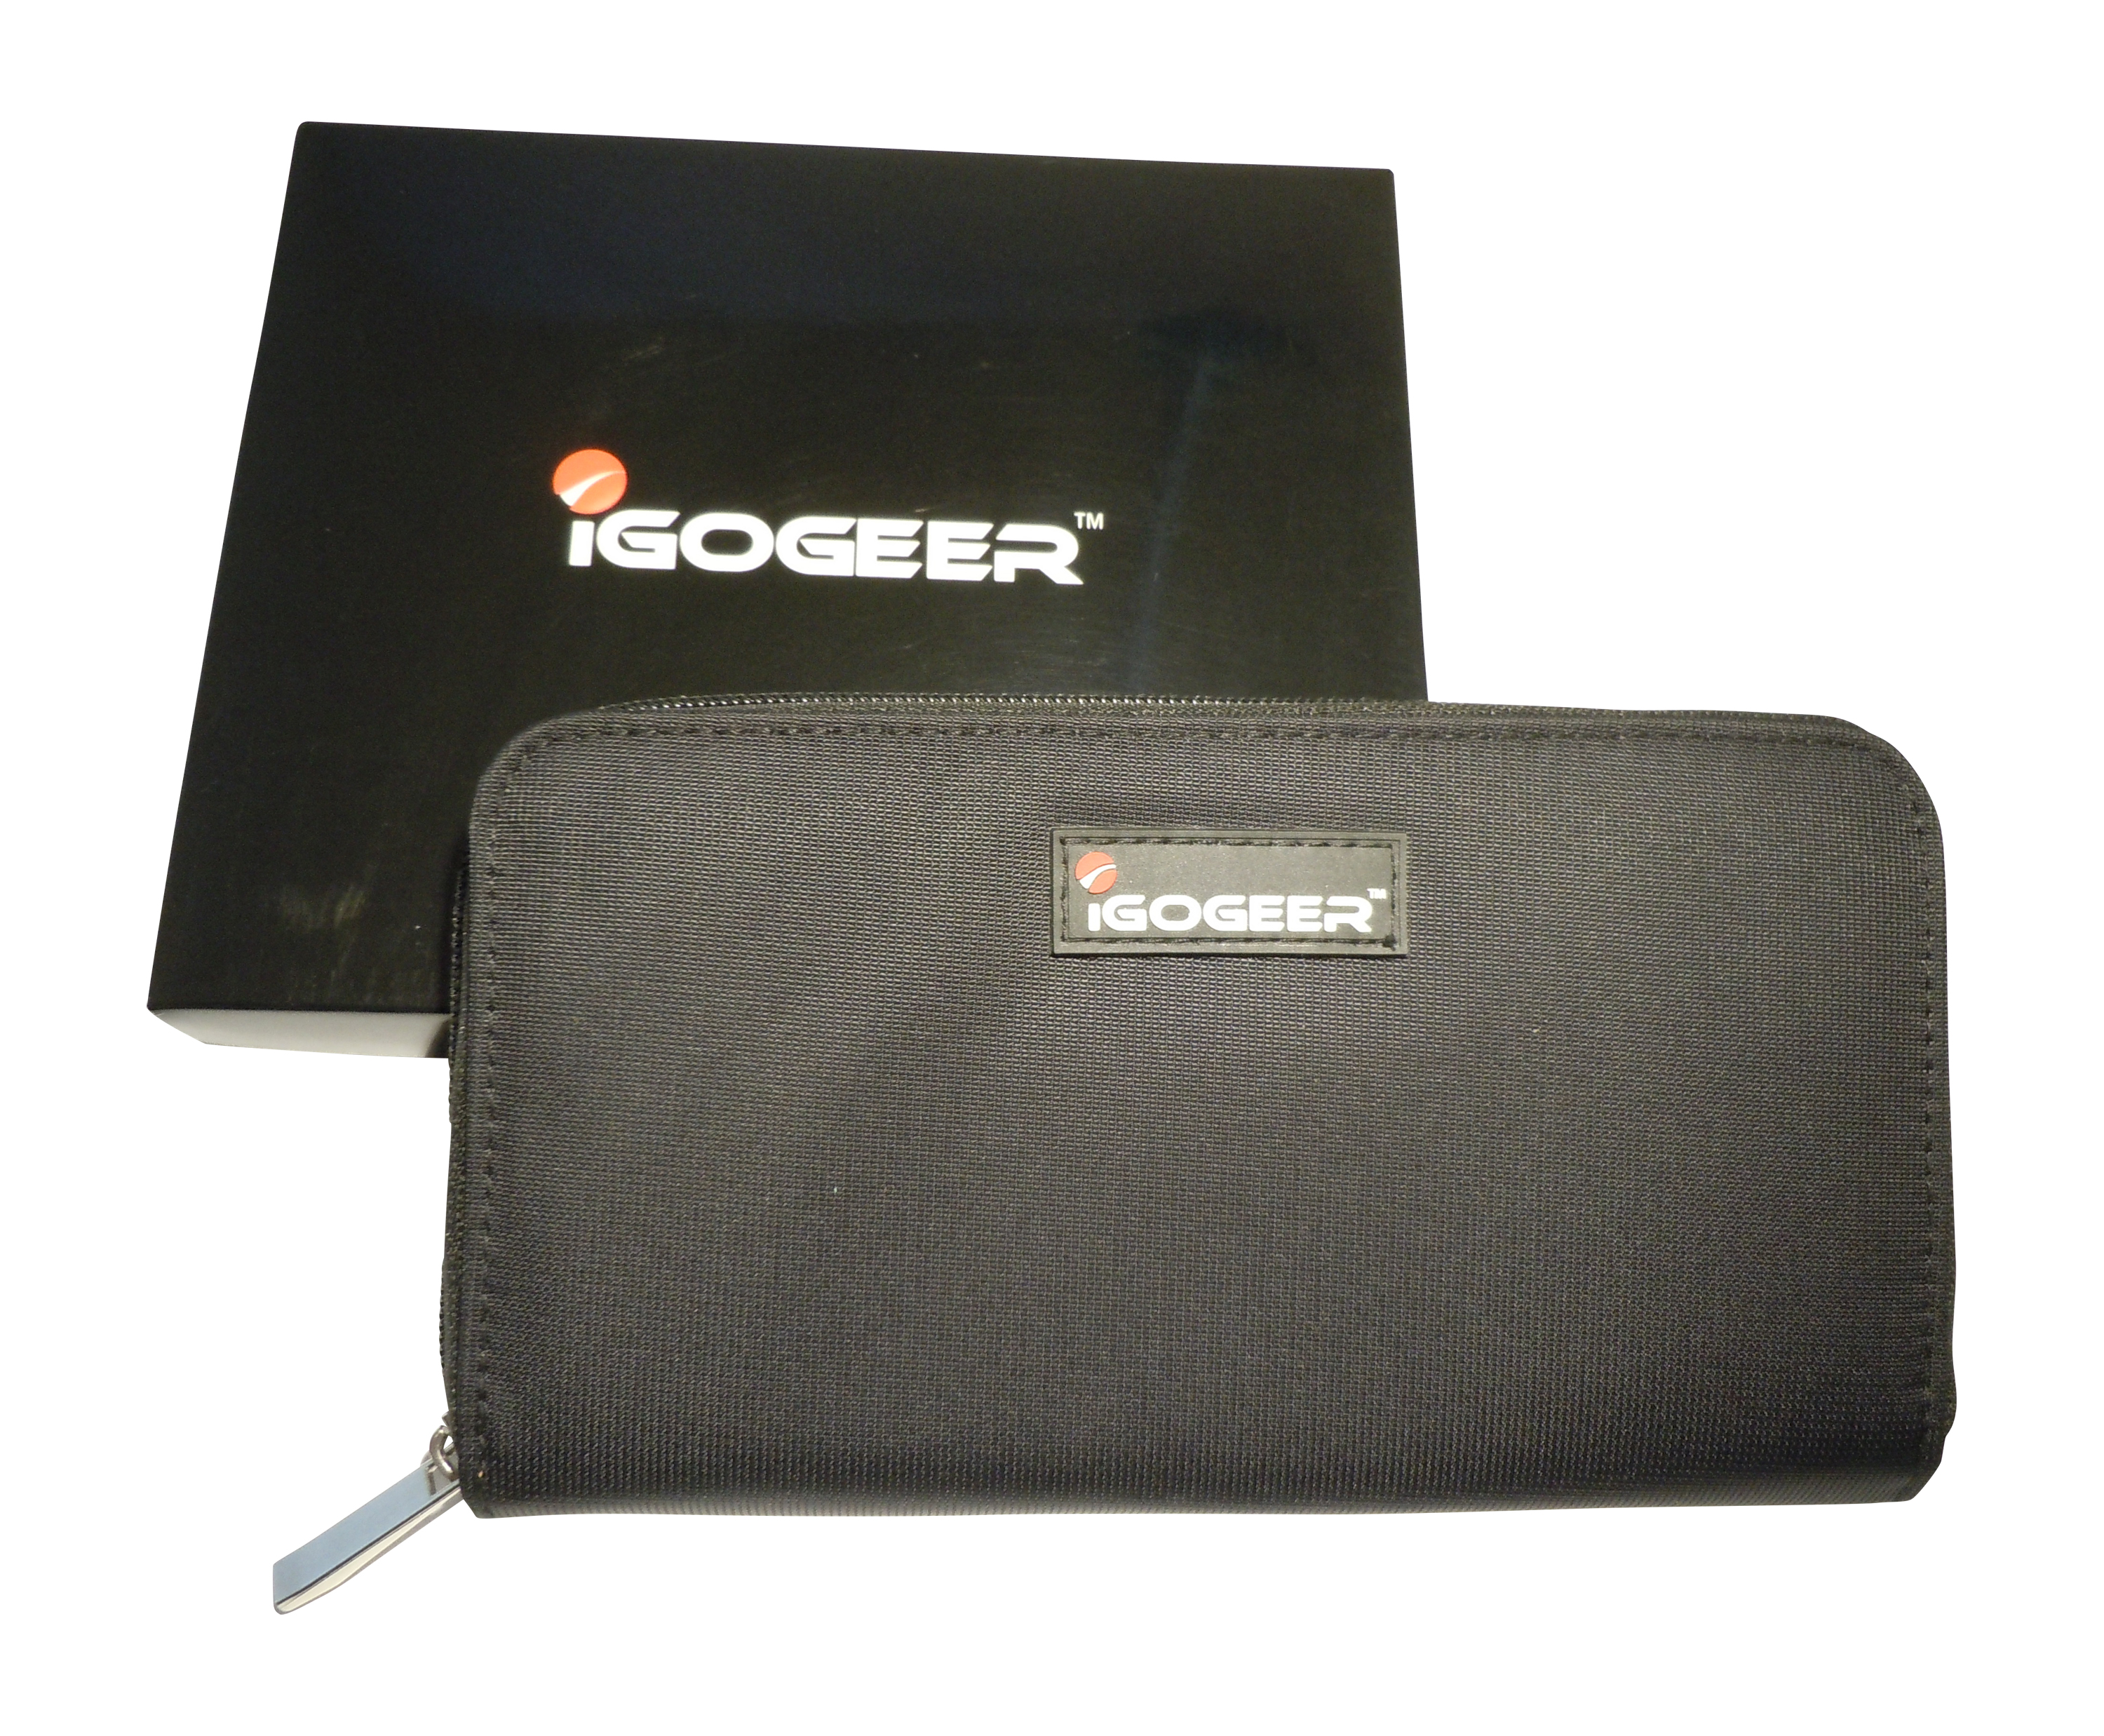 IGOGEER™ W05 Women Travel Clutch Wallet with Rfid Blocking for Stopping  Electronic Pickpocketing – Black